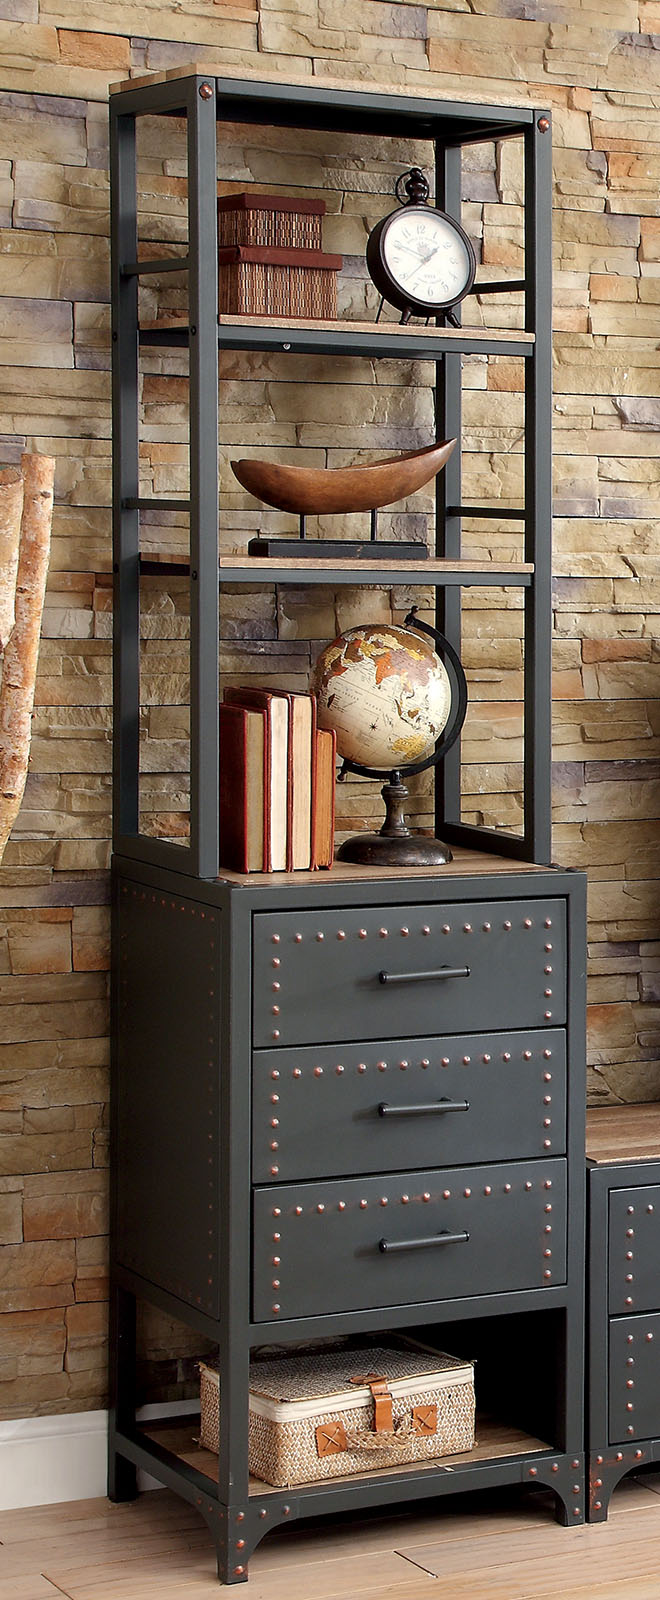 Galway Sand Black/Natural Tone Pier Cabinet